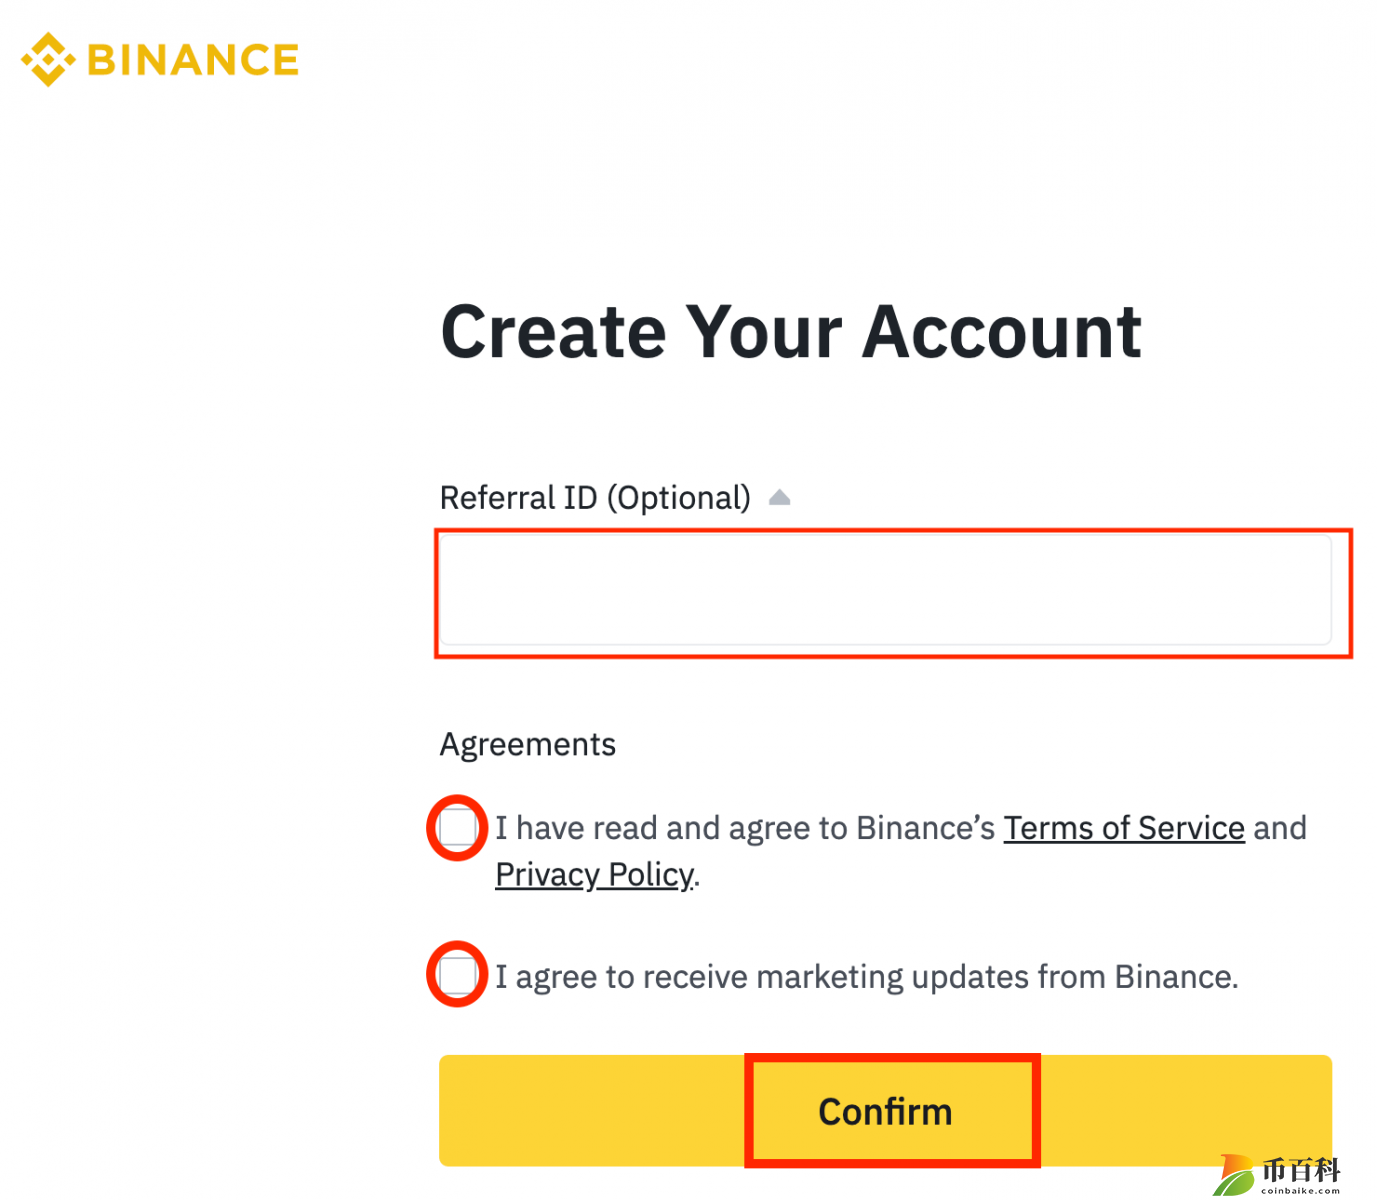 1caba7b2d655535576289cf3163e836e_how-to-register-and-login-account-on-binance-1685104028-11.png